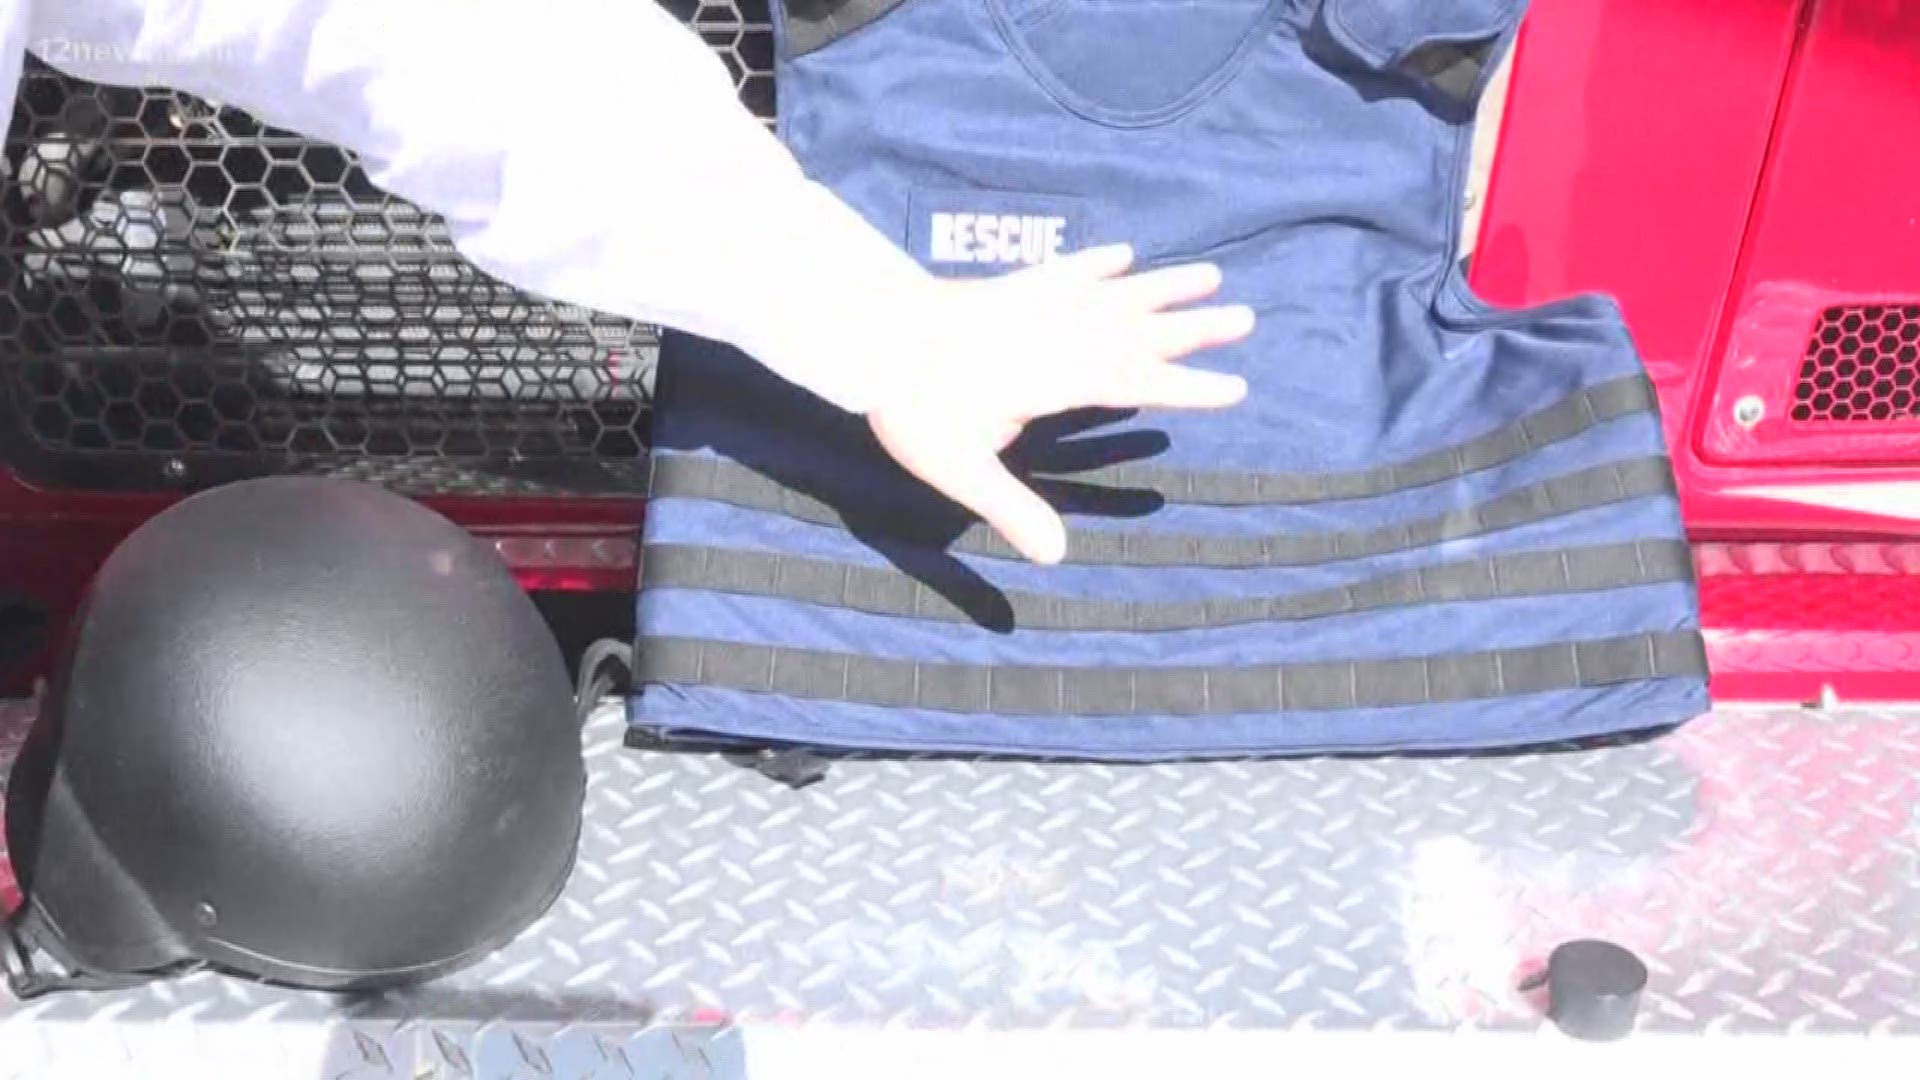 There is a need for bullet proof body armor for firefighters in active shooting emergencies, and Tempe is well-equipped with vest, helmet and med-kit and Mesa has been approved also. Note: The video provided by Tempe FD is a drill.